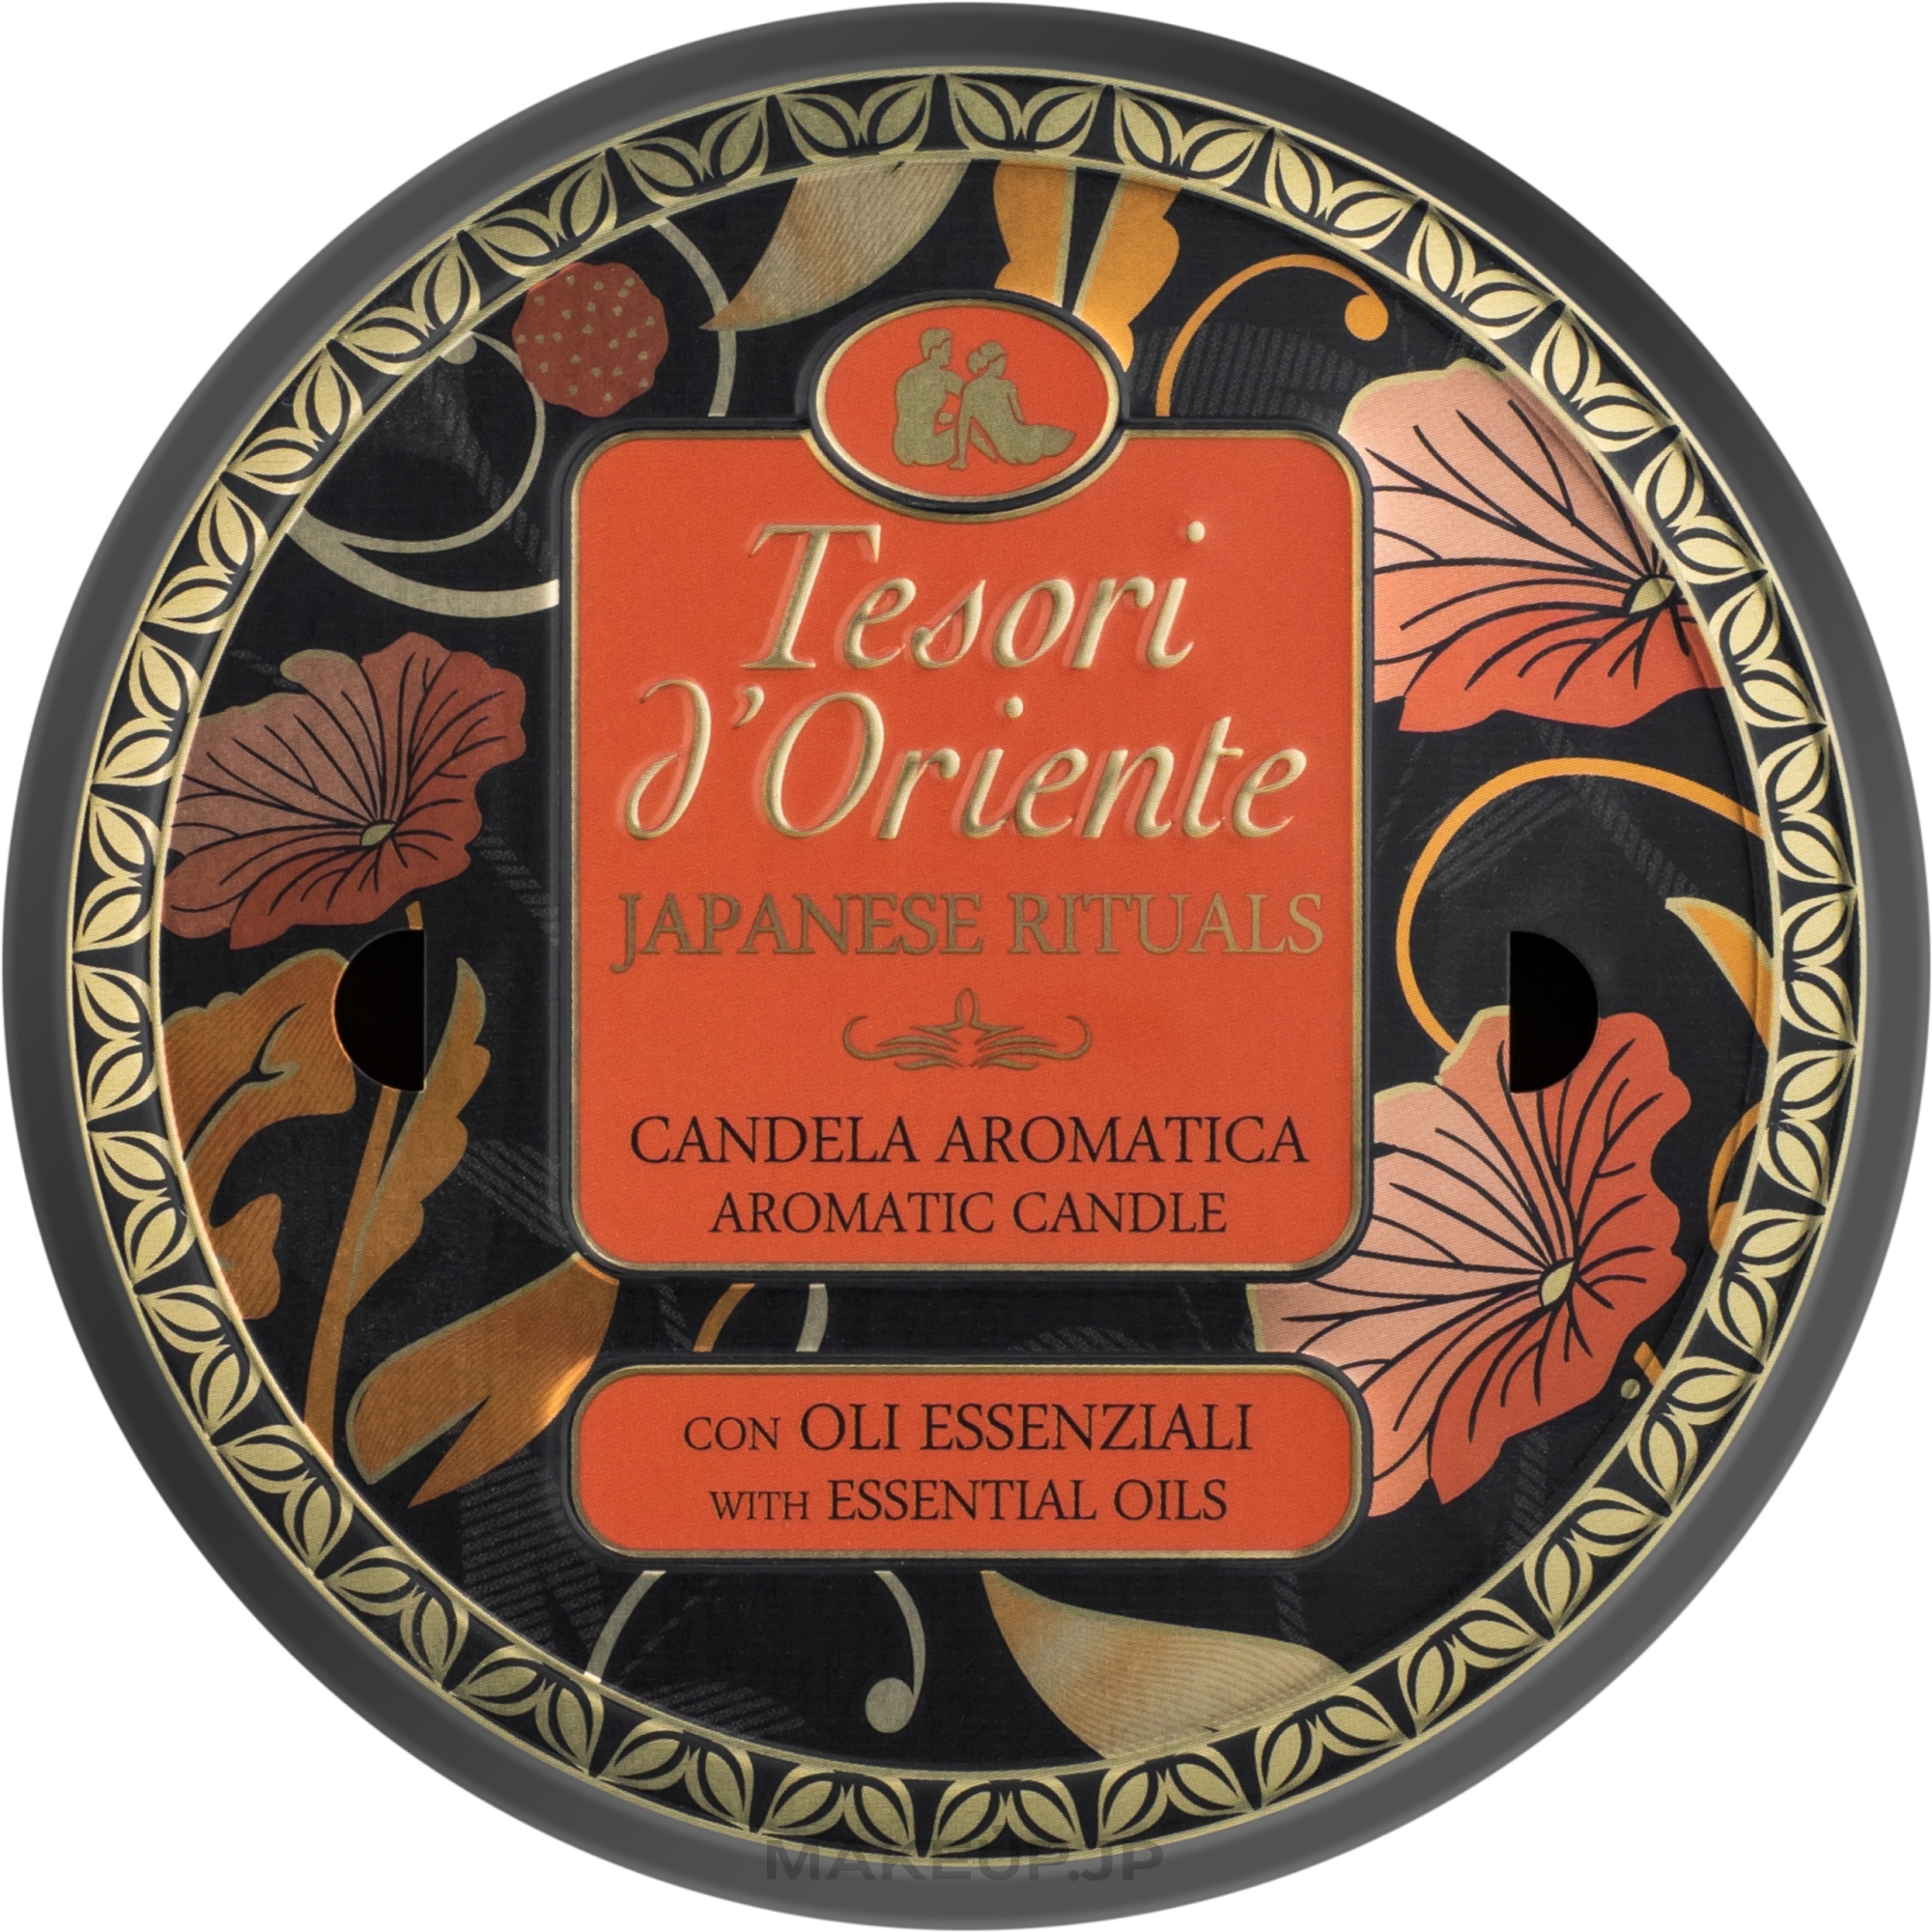 Tesori d`Oriente Japanesse Rituals - Scented Candle — photo 200 g